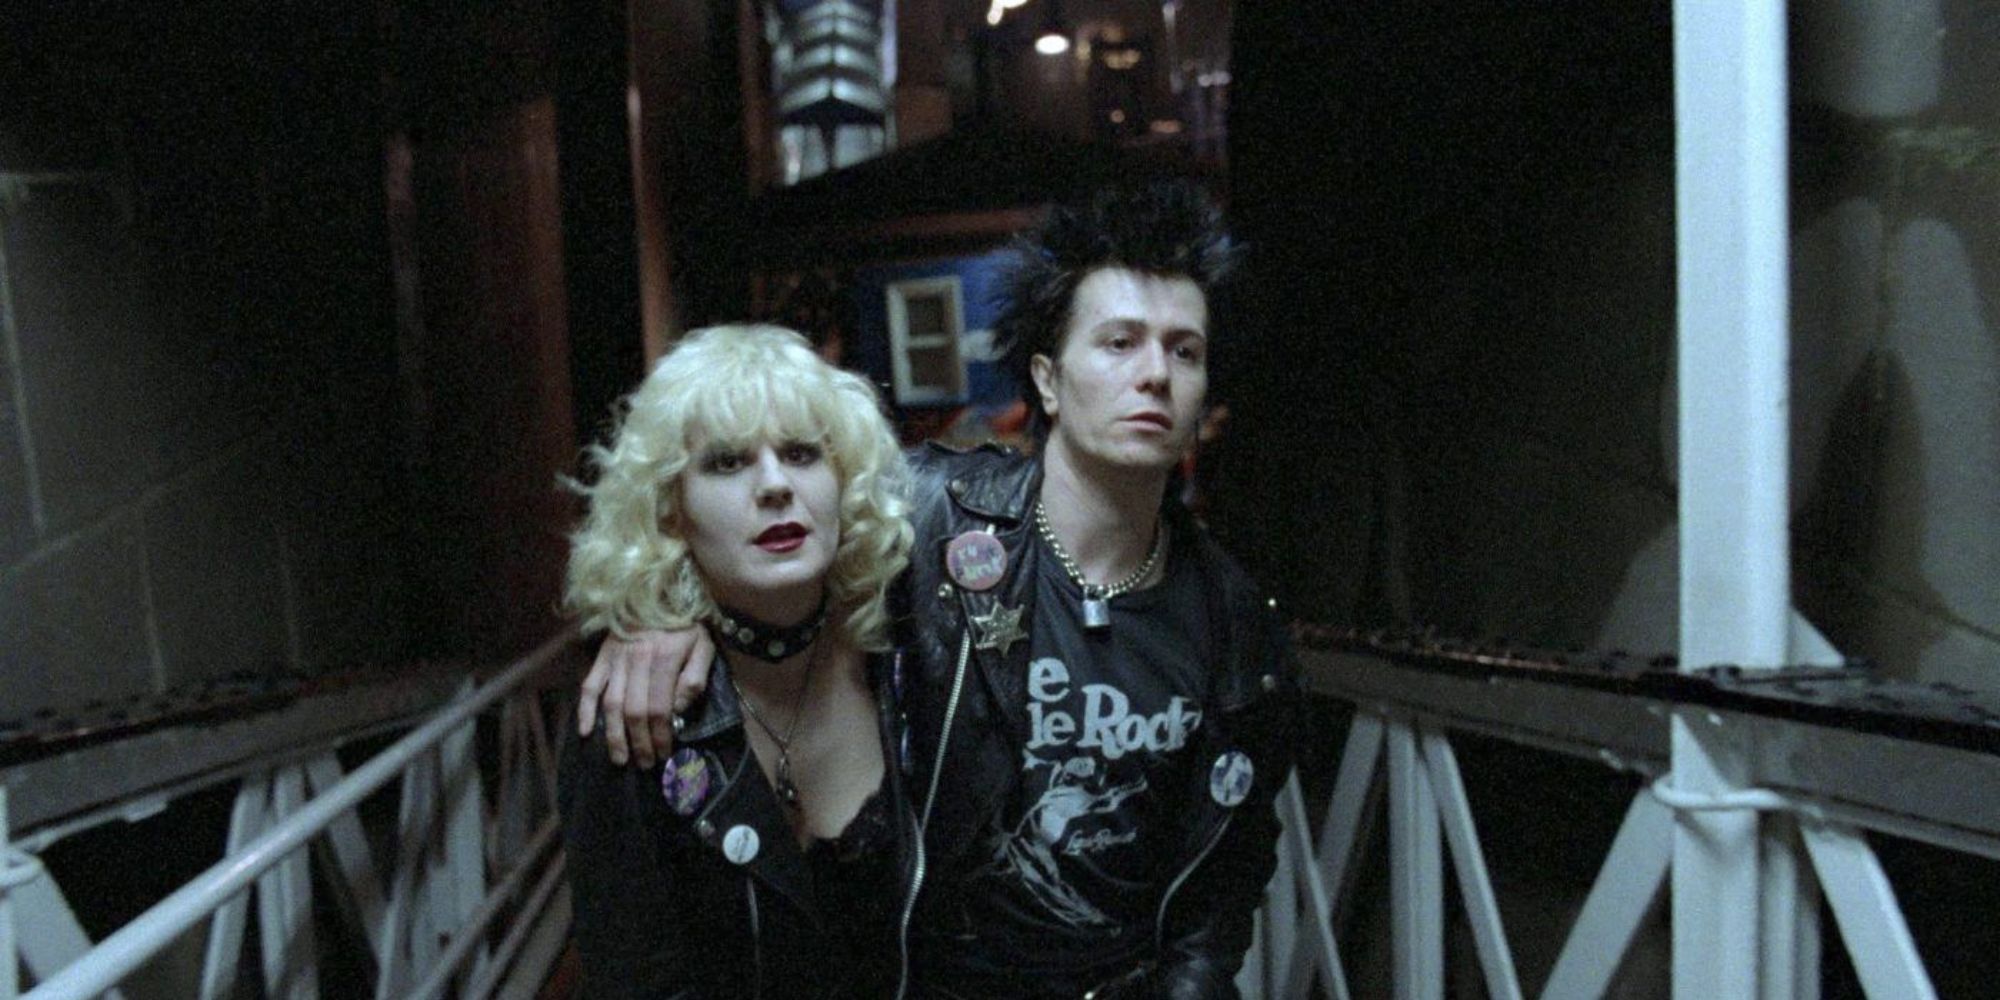 Sid and Nancy walking up a ramp with Sid's arm around Nancy's shoulder in the Sid & Nancy movie.